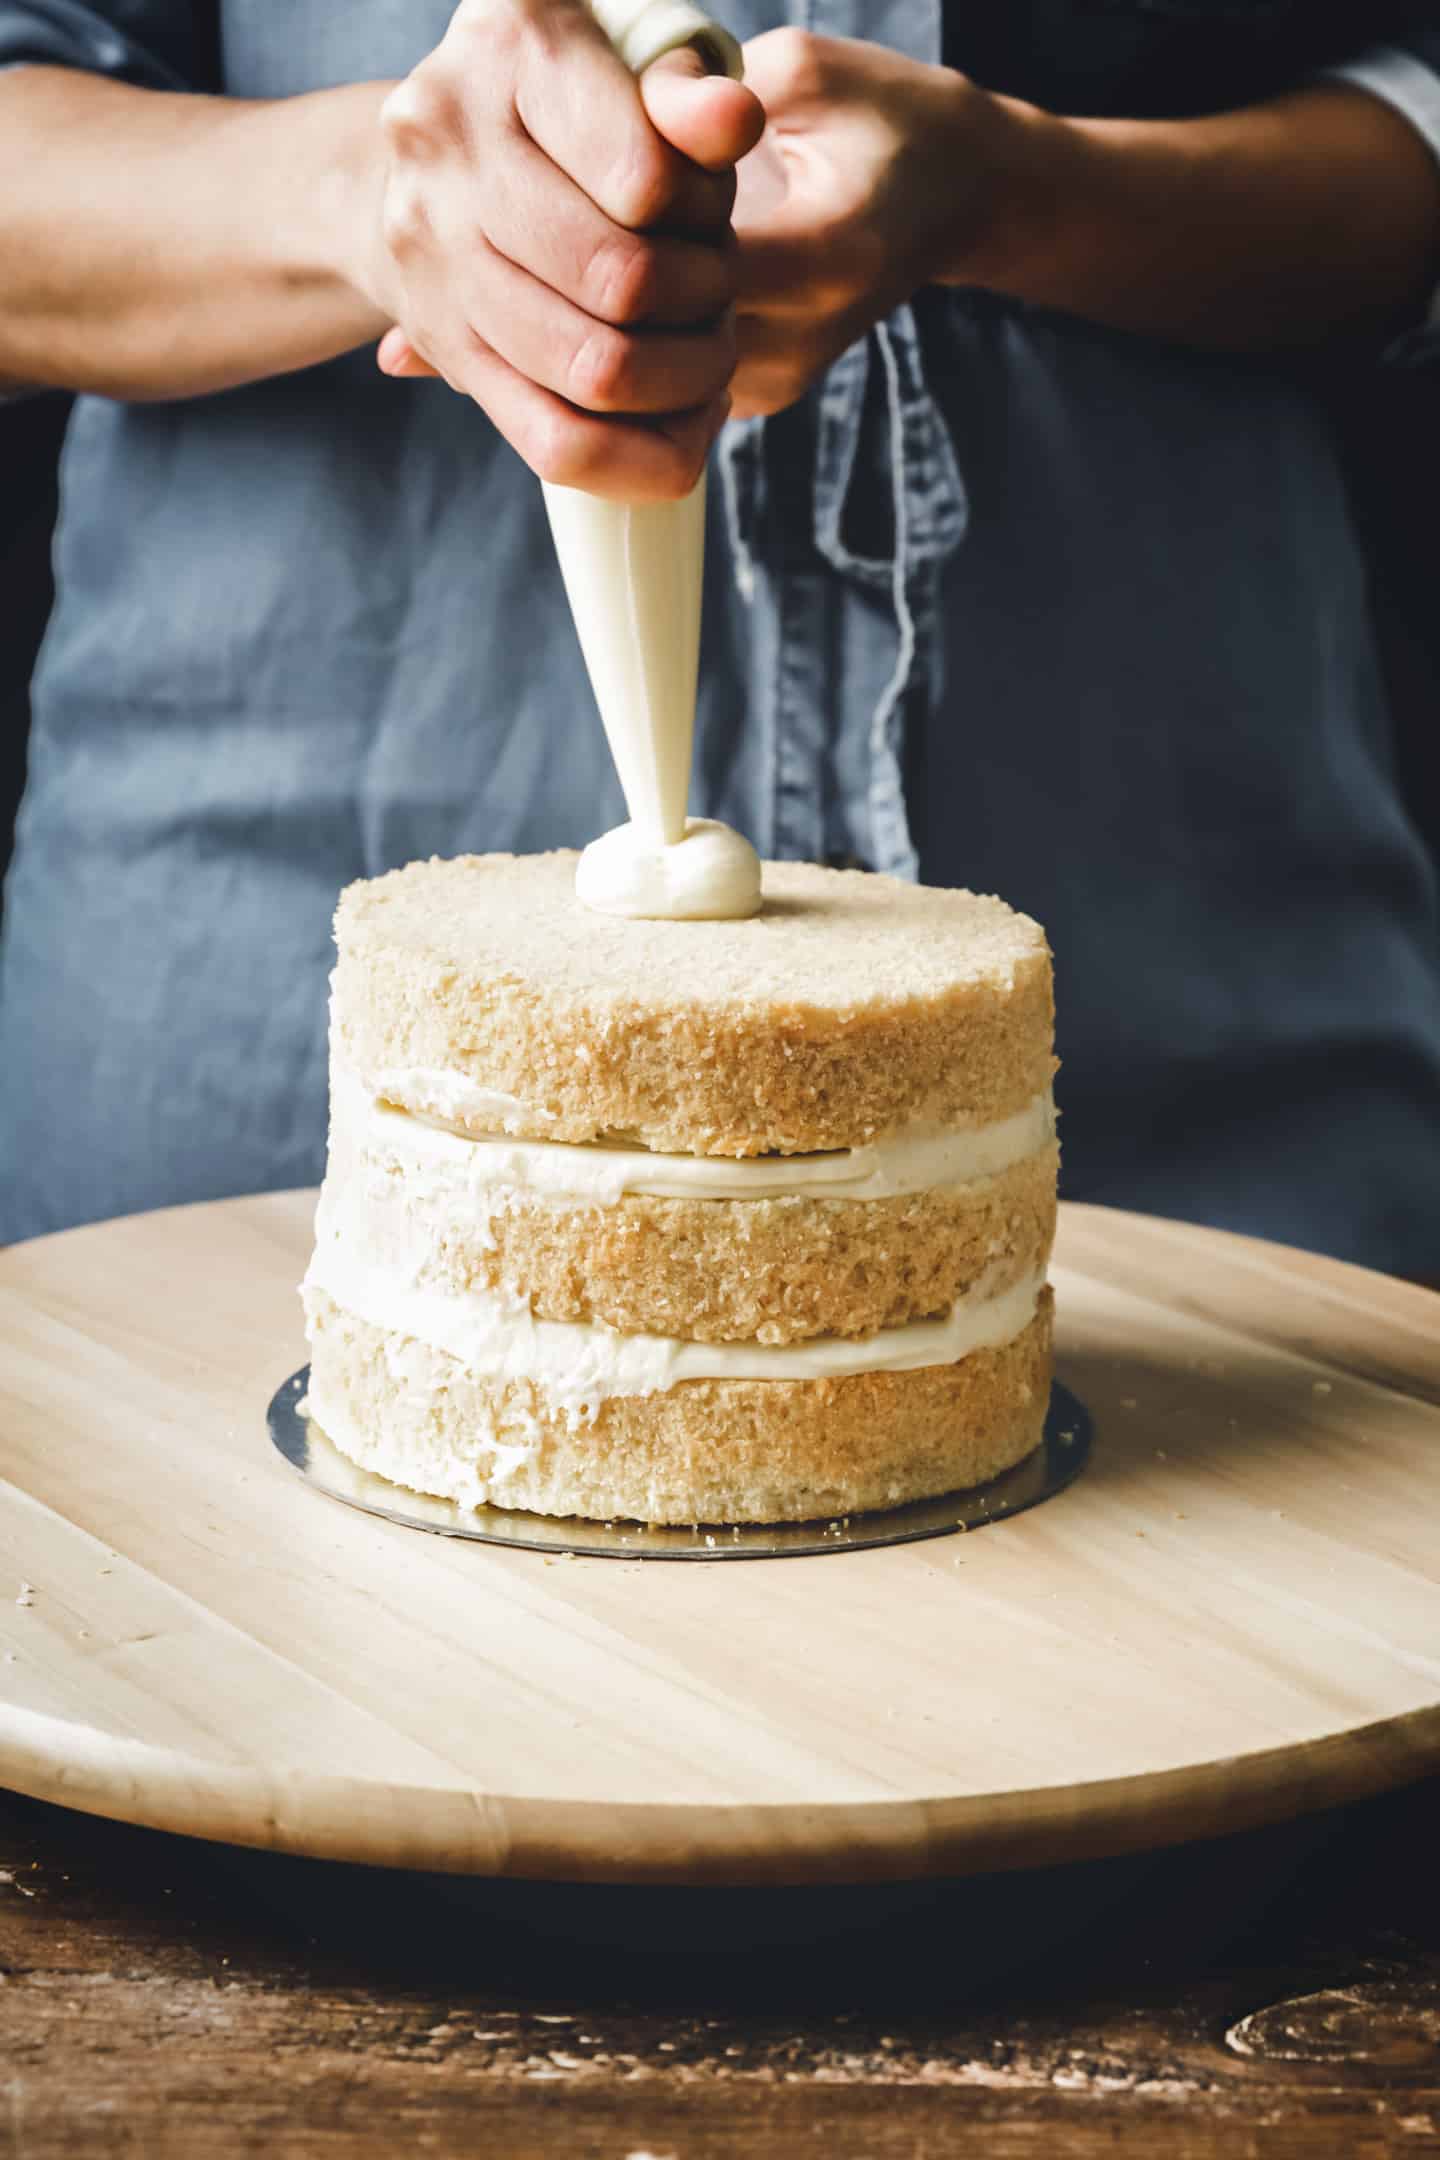 The best cake decorating tools you can buy